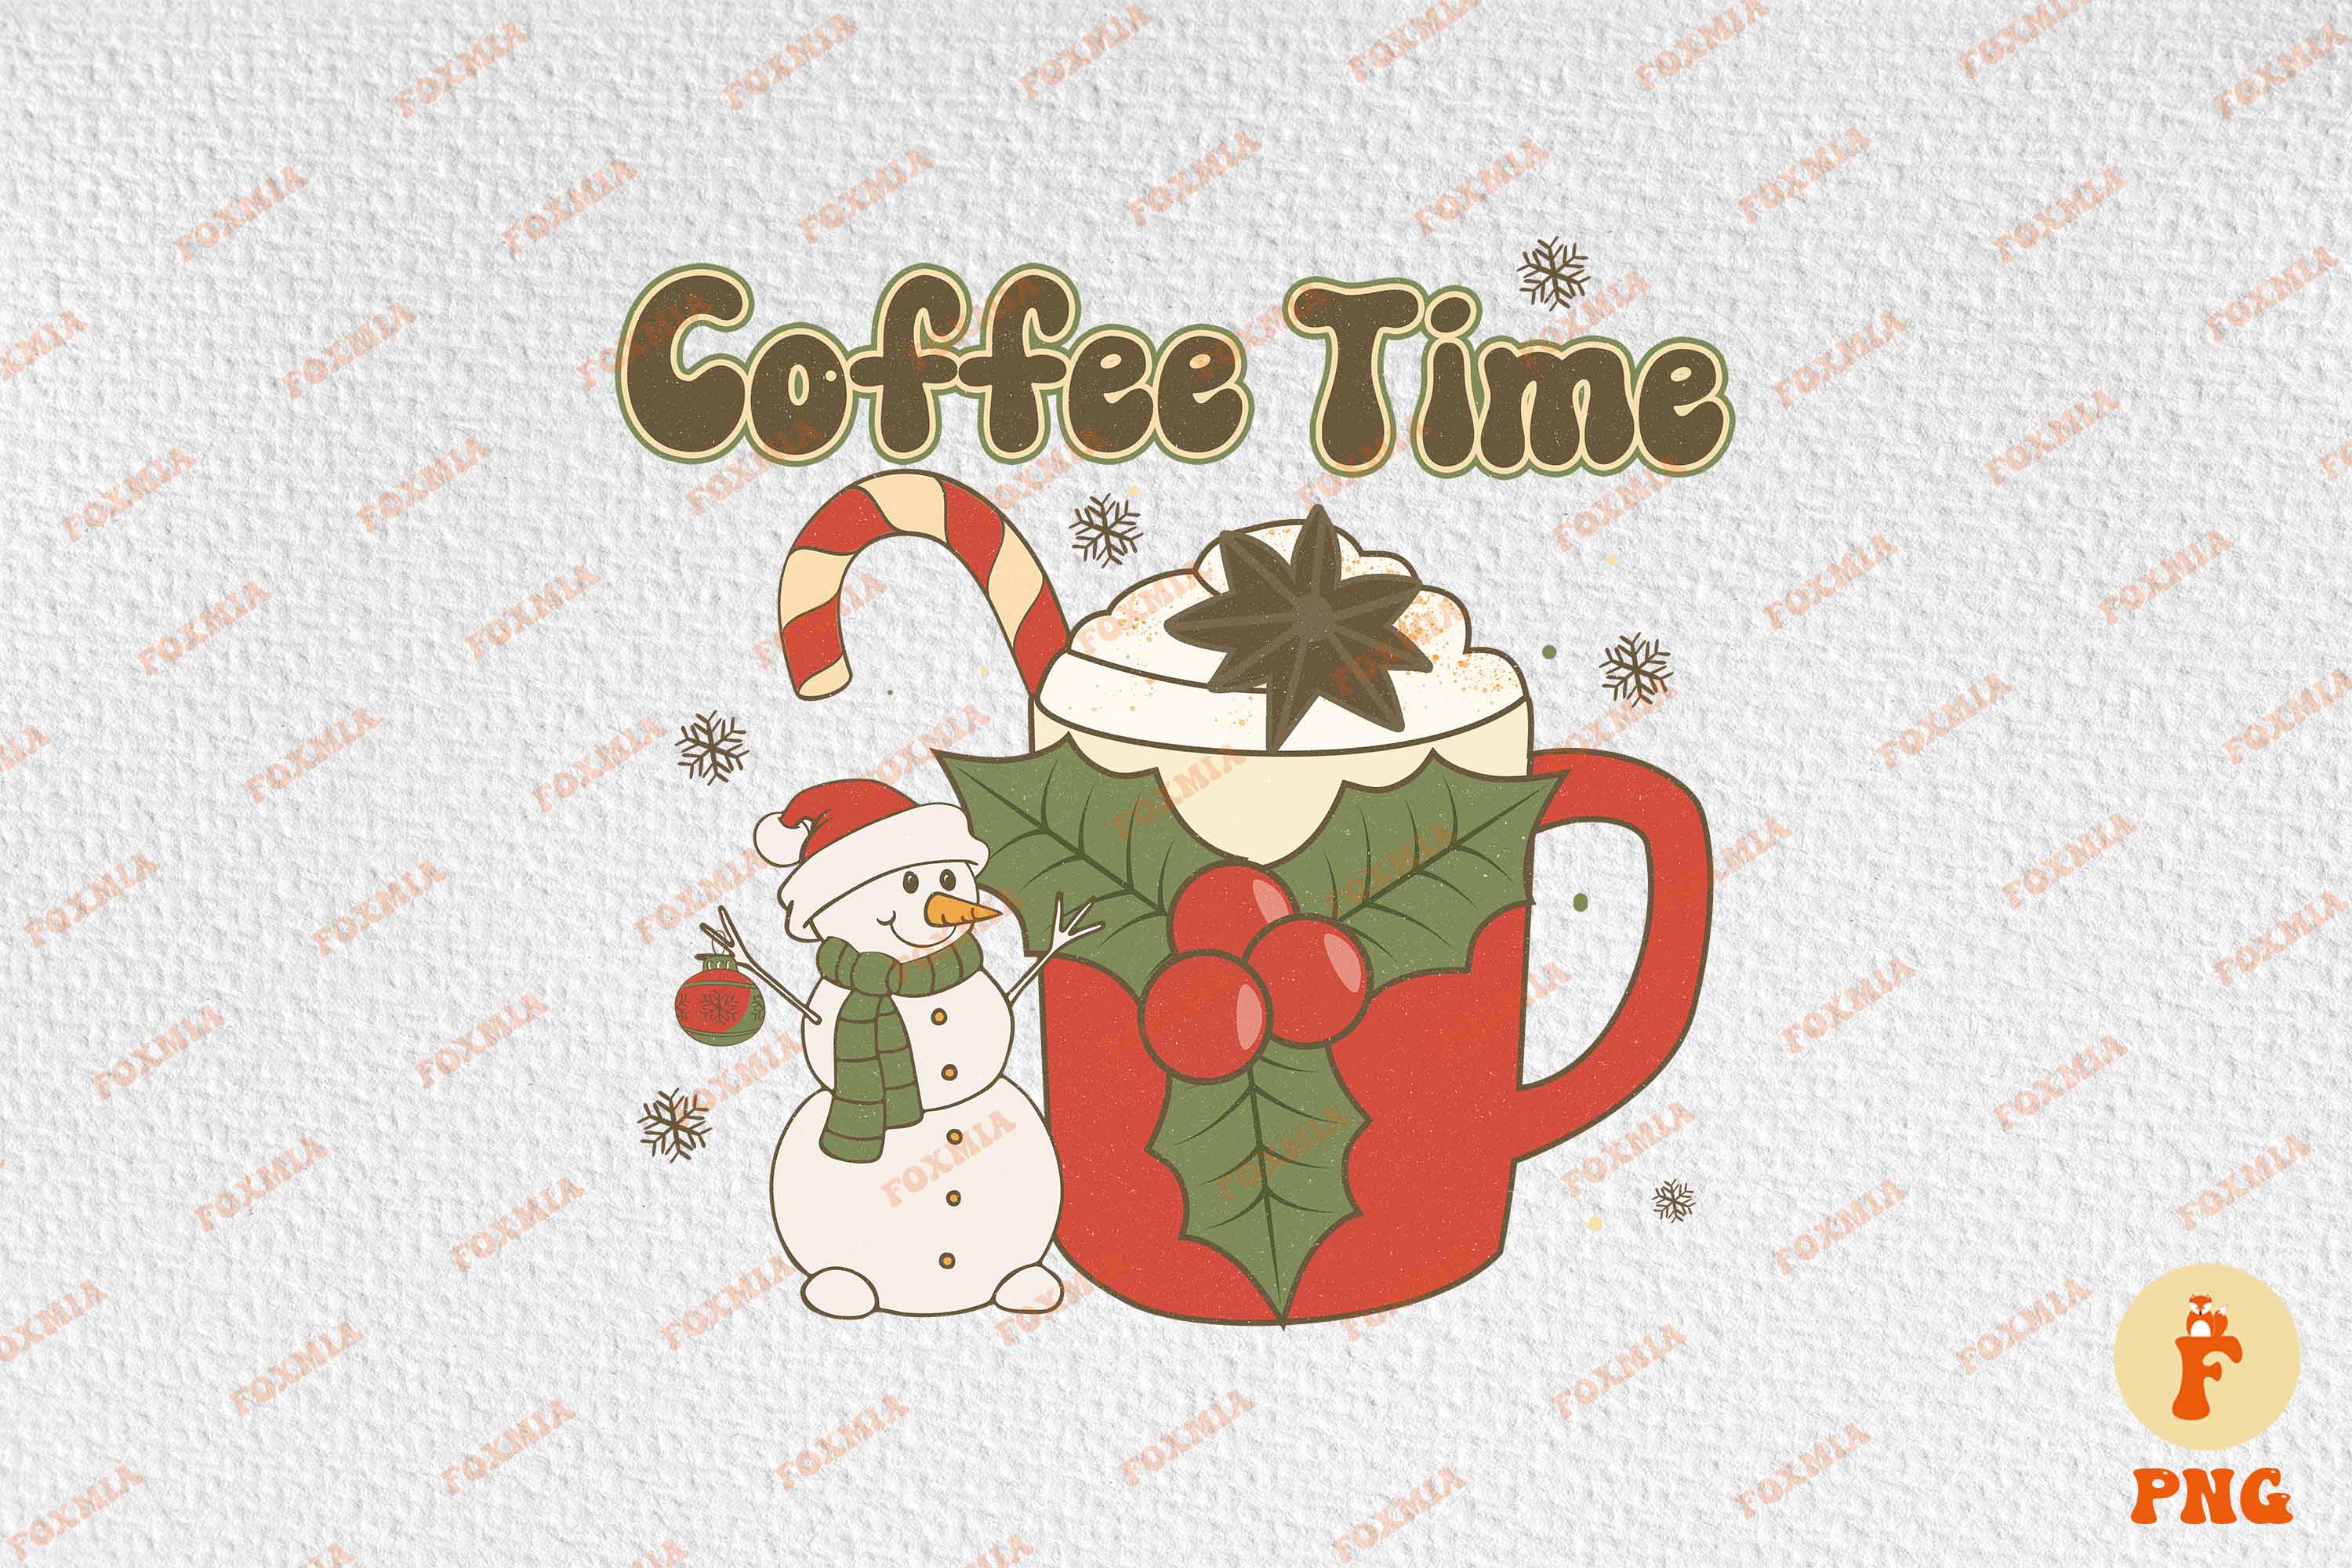 Cute image for coffee time.